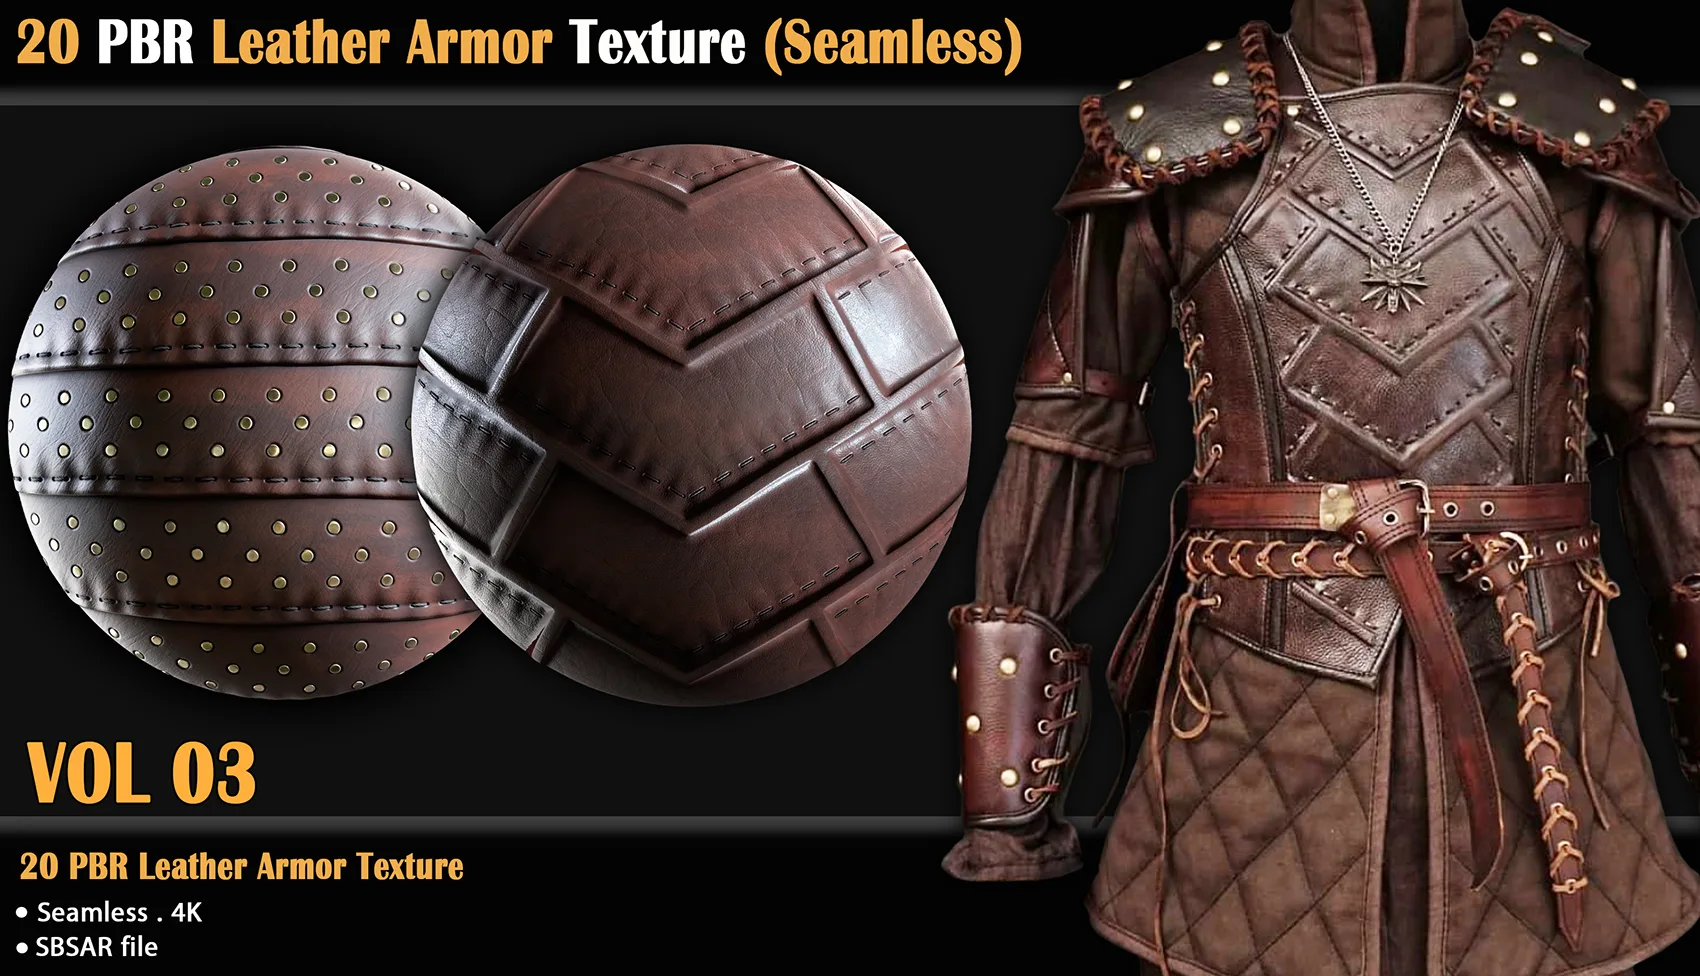 20 PBR Leather Armor Texture /Seamless